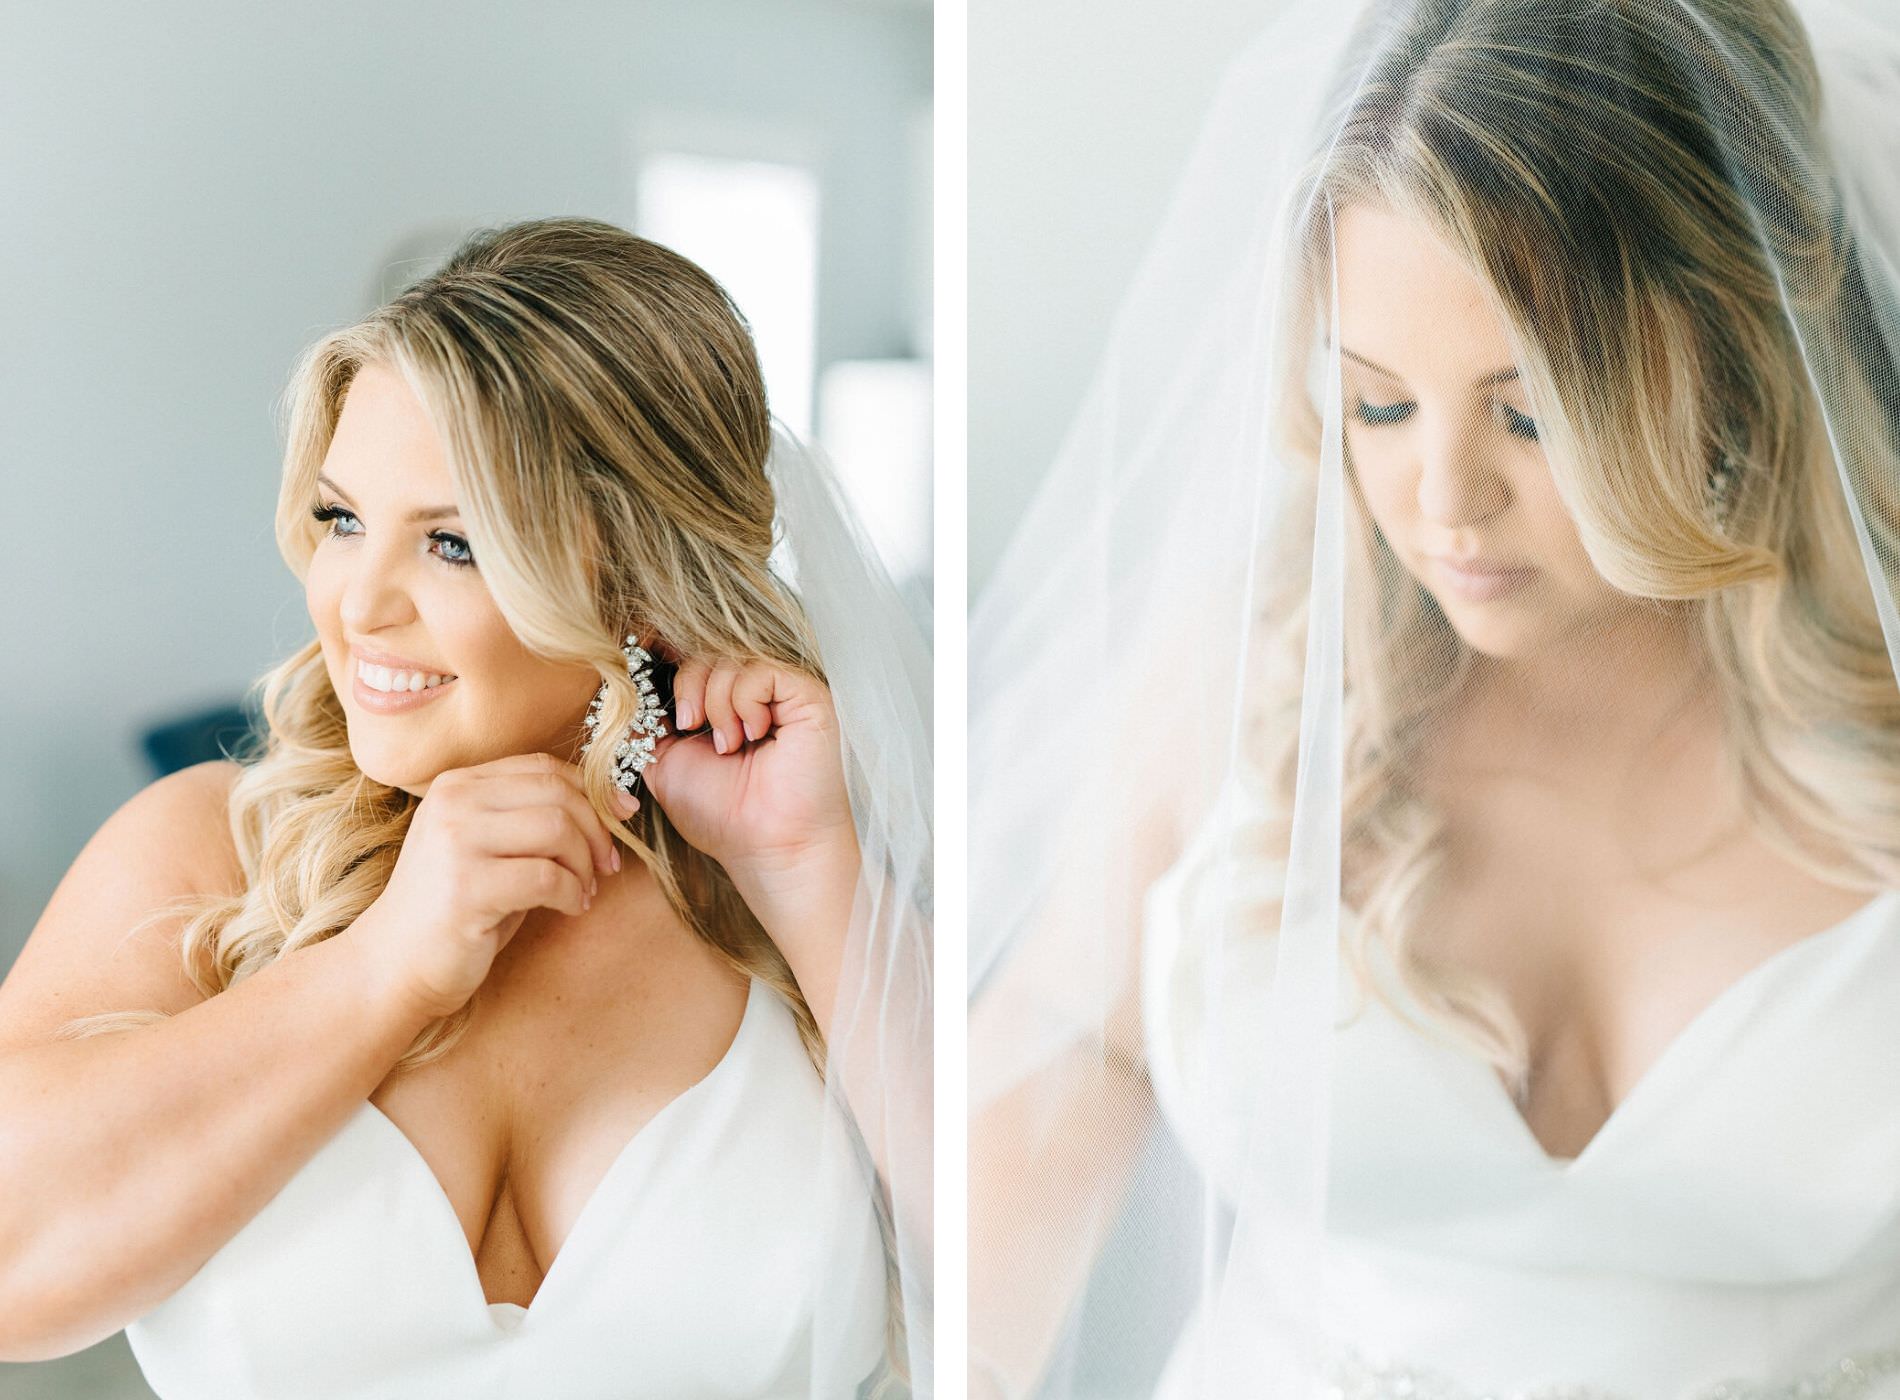 Classic Florida Bride Getting Wedding Ready with Diamond Dangle Earring, Elegant Tampa Bay Bridal Beauty Portrait with Veil